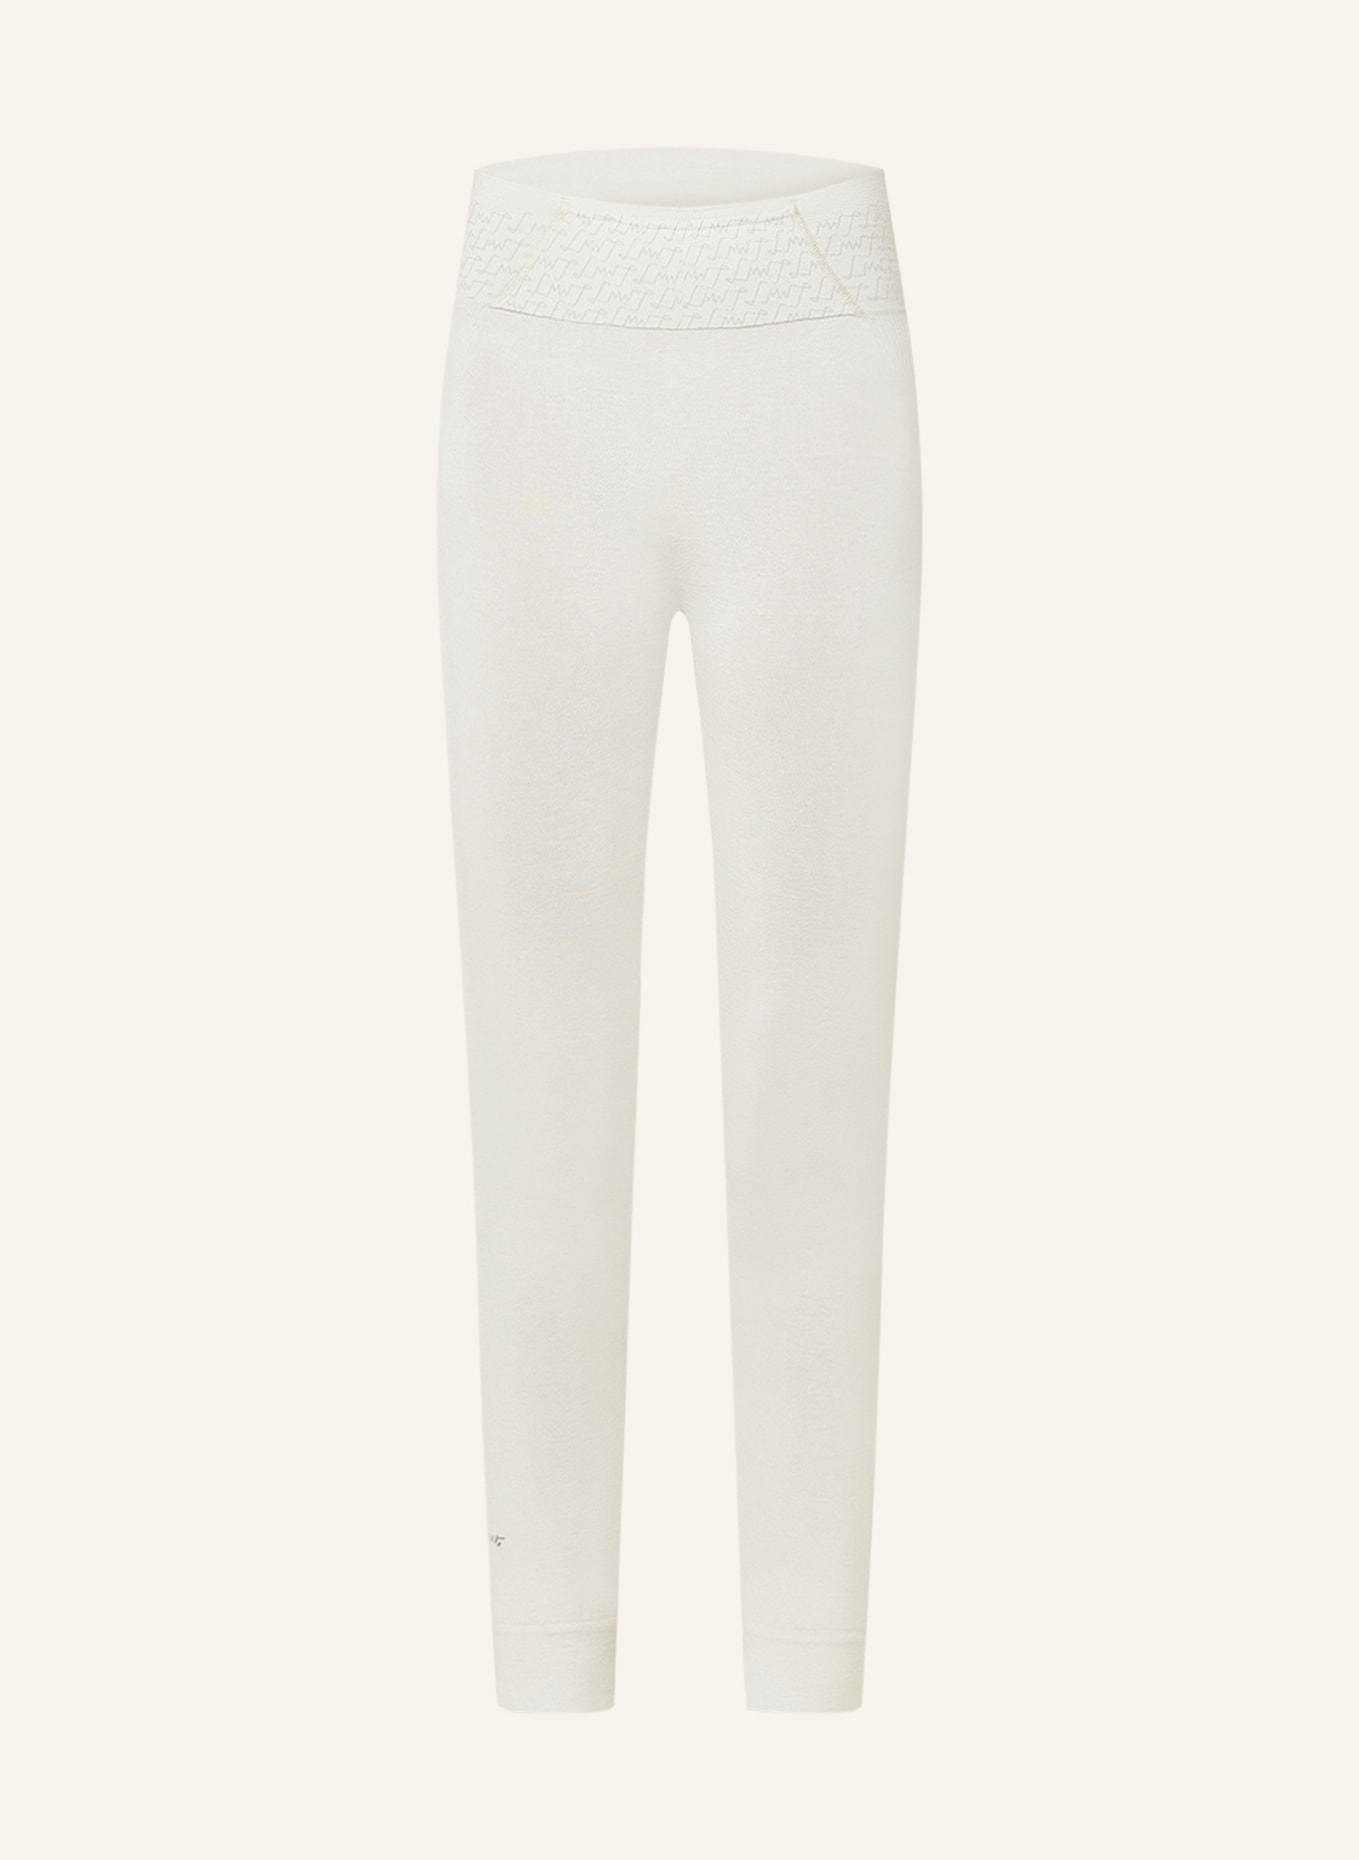 LaMunt Functional underwear trousers ALICE with cashmere, Color: CREAM (Image 1)